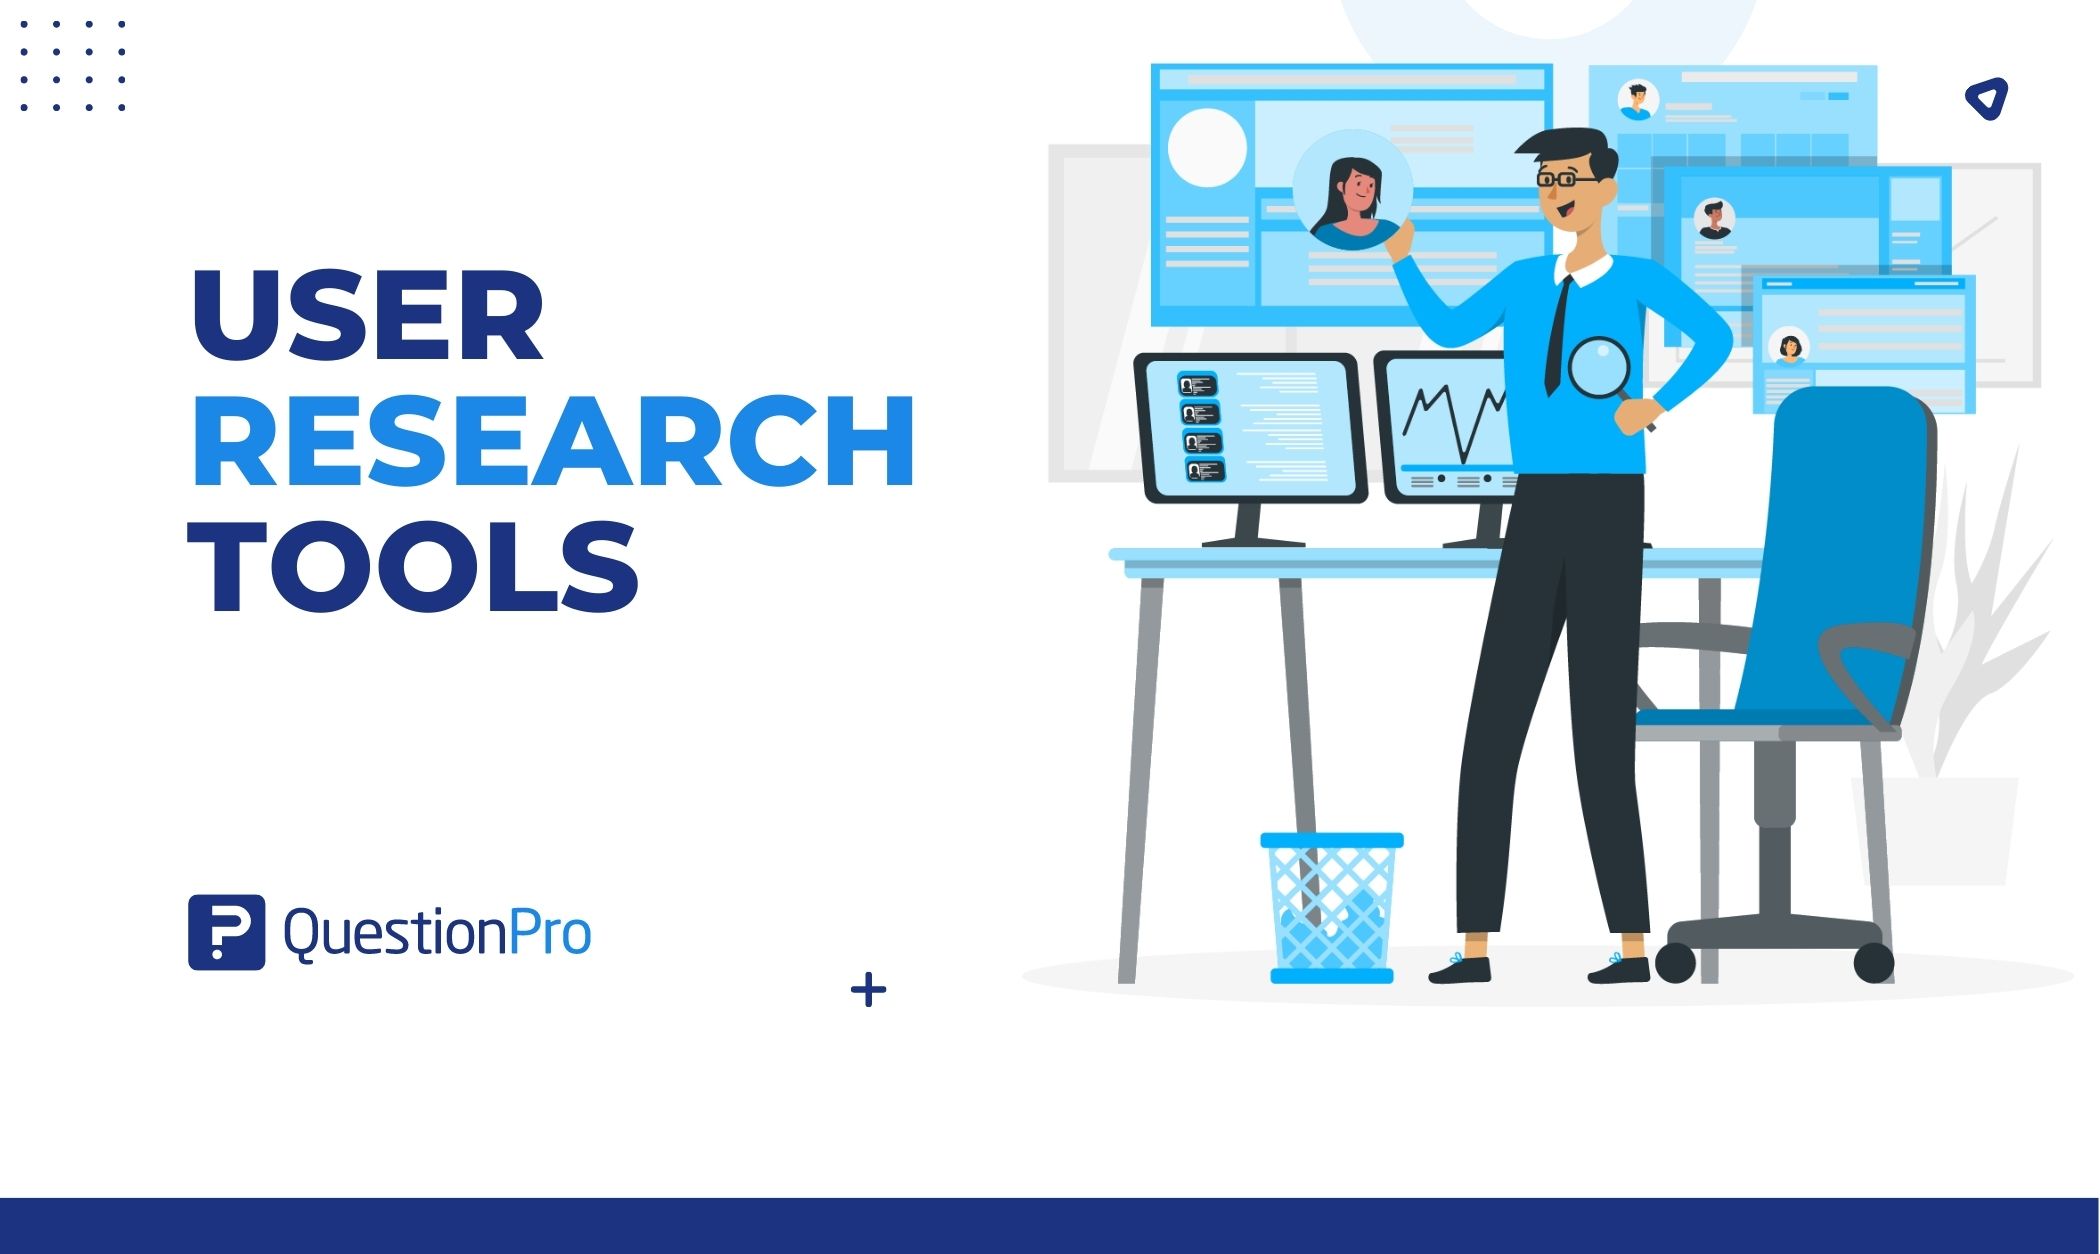 Explore the diversity, usability and capabilities of user research tools. Improve your research game with these user-friendly tools.